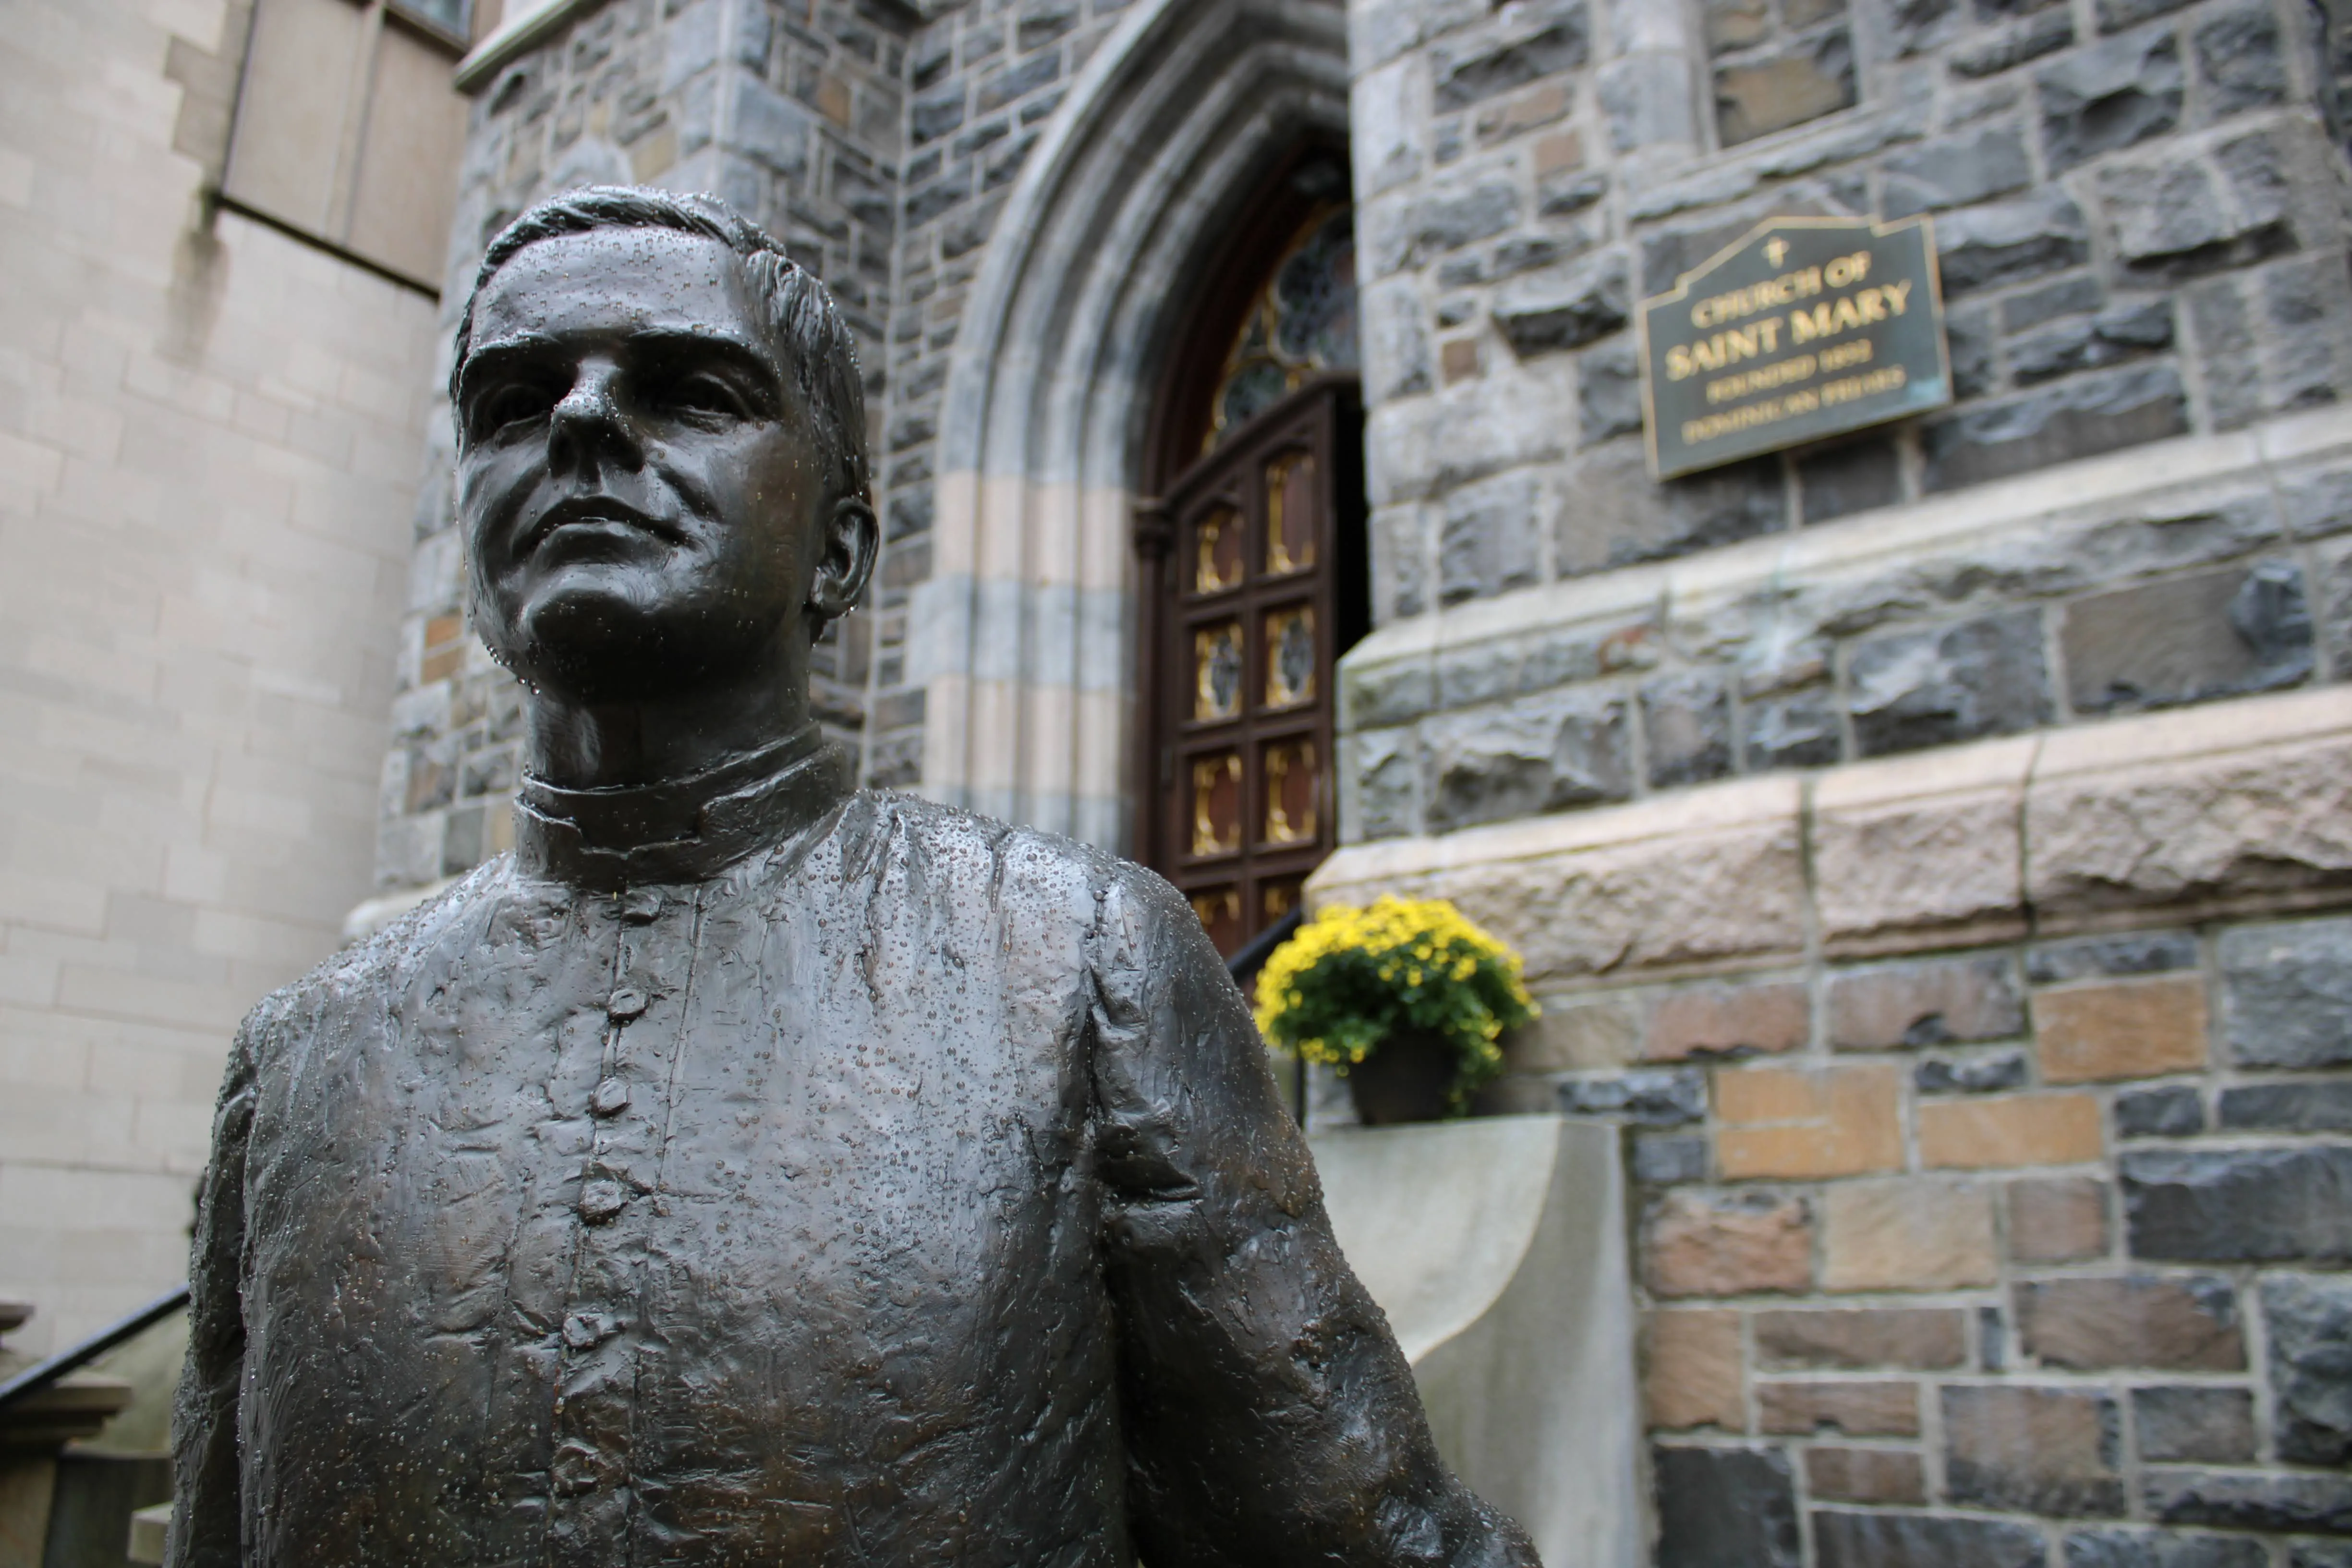 A statue of Blessed Michael McGivney, sculpted by Stanley Bliefeld, is displayed outside of St. Mary’s Church in New Haven, Connecticut.?w=200&h=150